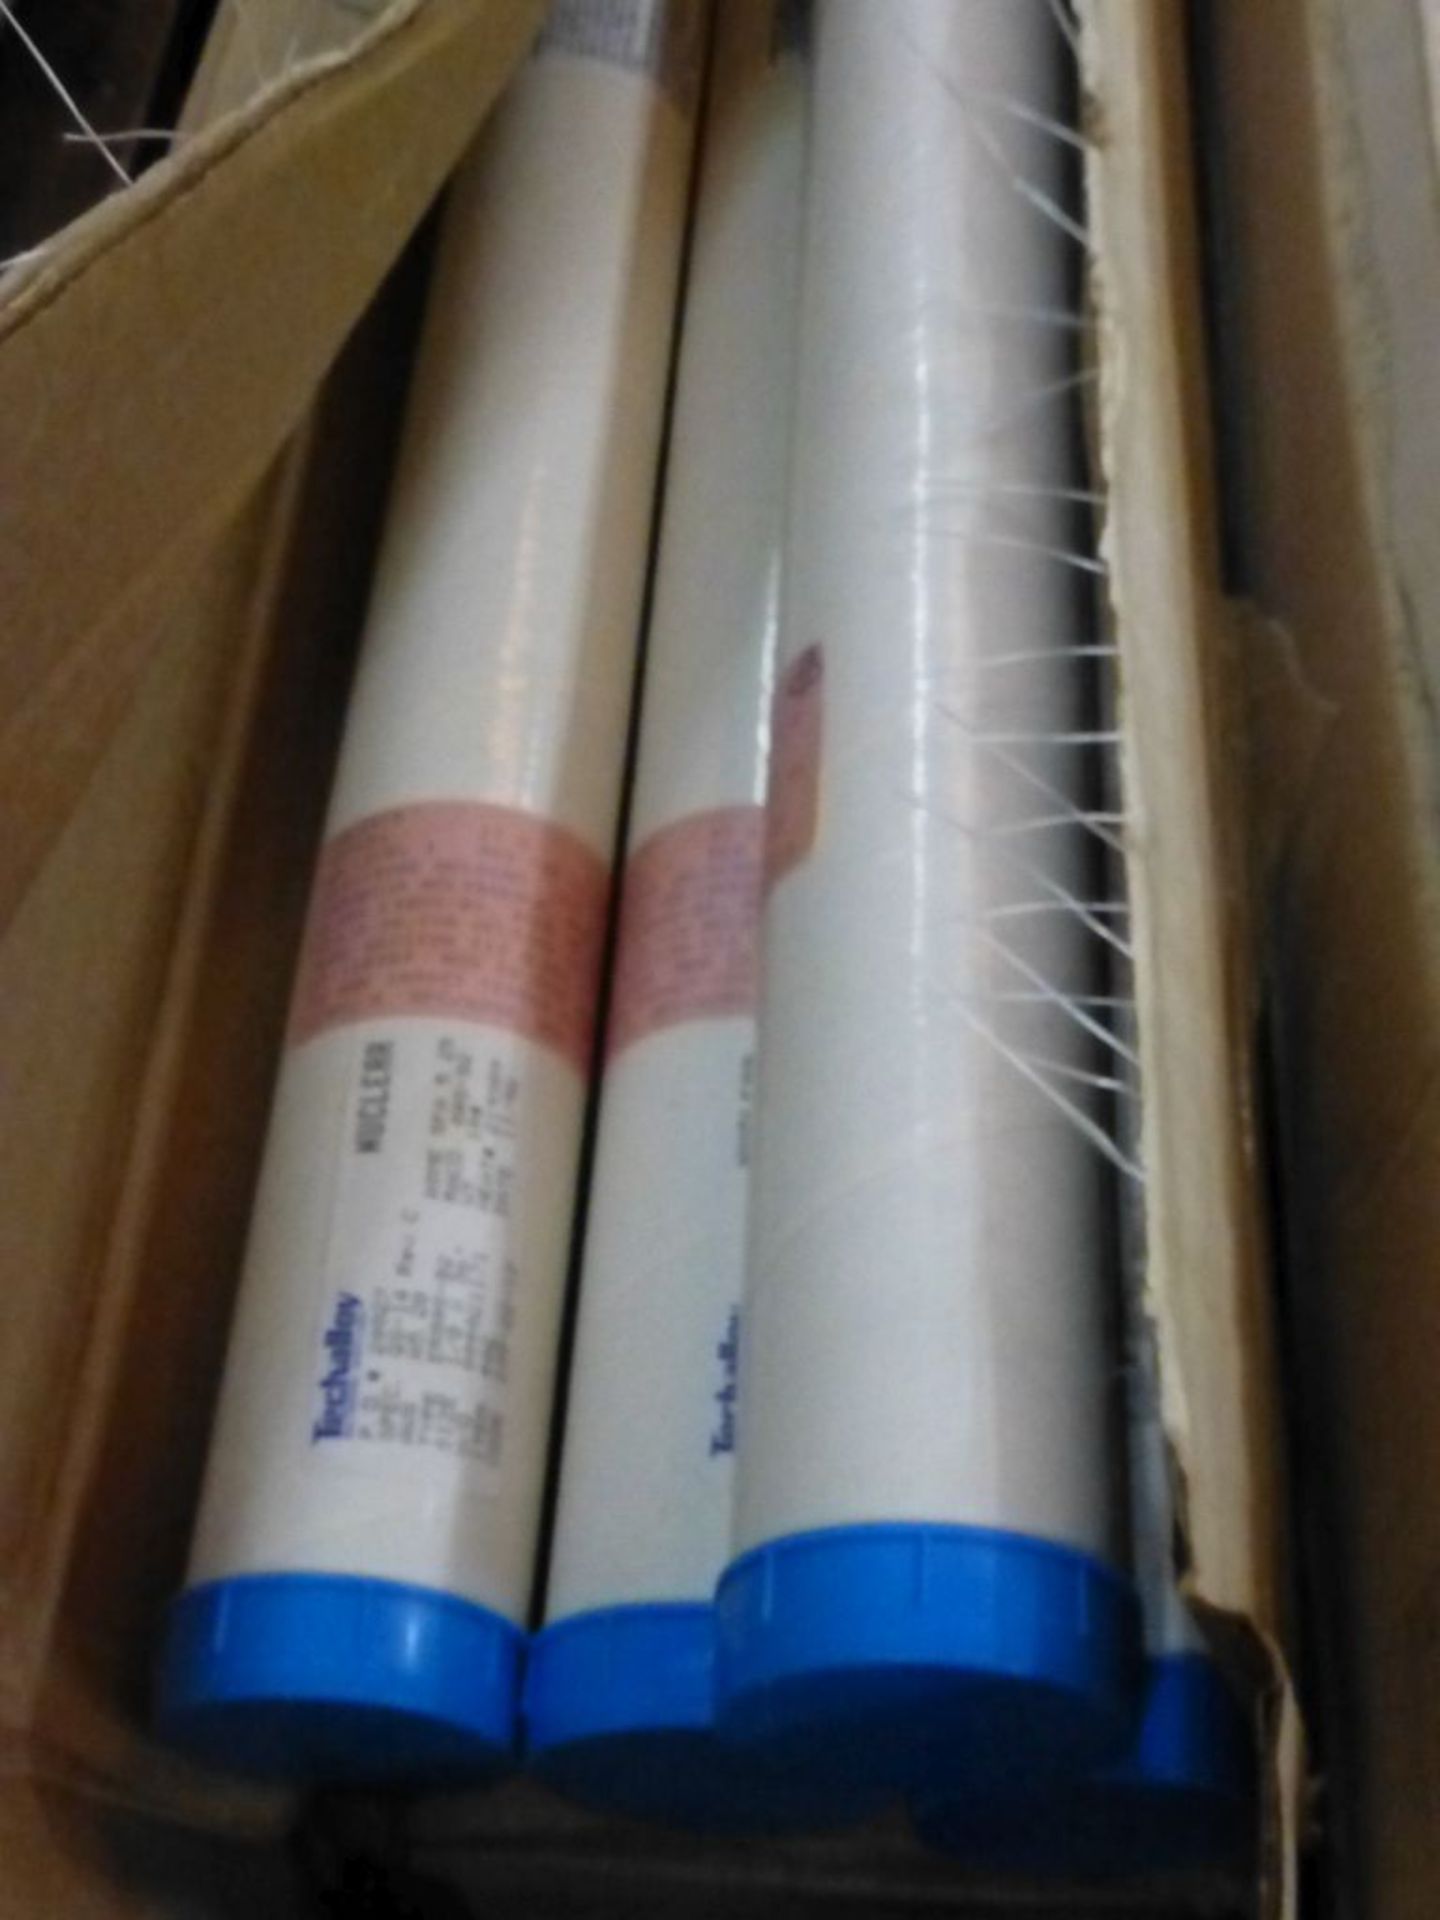 Lot of (2) Boxes of Techalloy Welding Rods|Part No. 20827; Type: ER805-B2; Size: 1/8" x 36" - Image 5 of 7